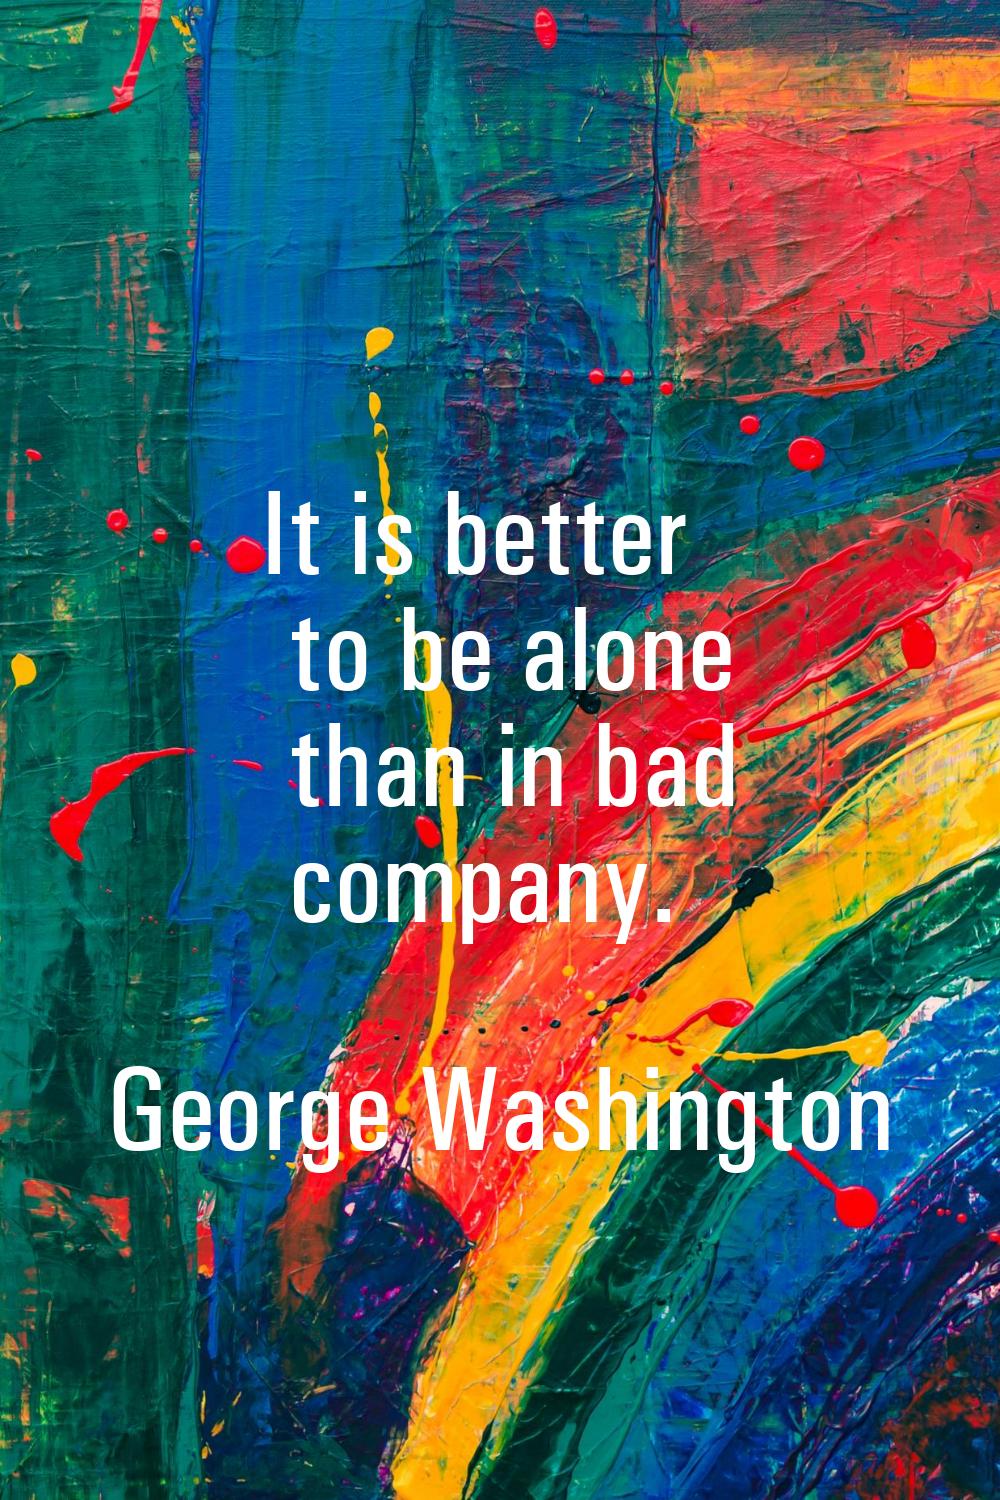 It is better to be alone than in bad company.